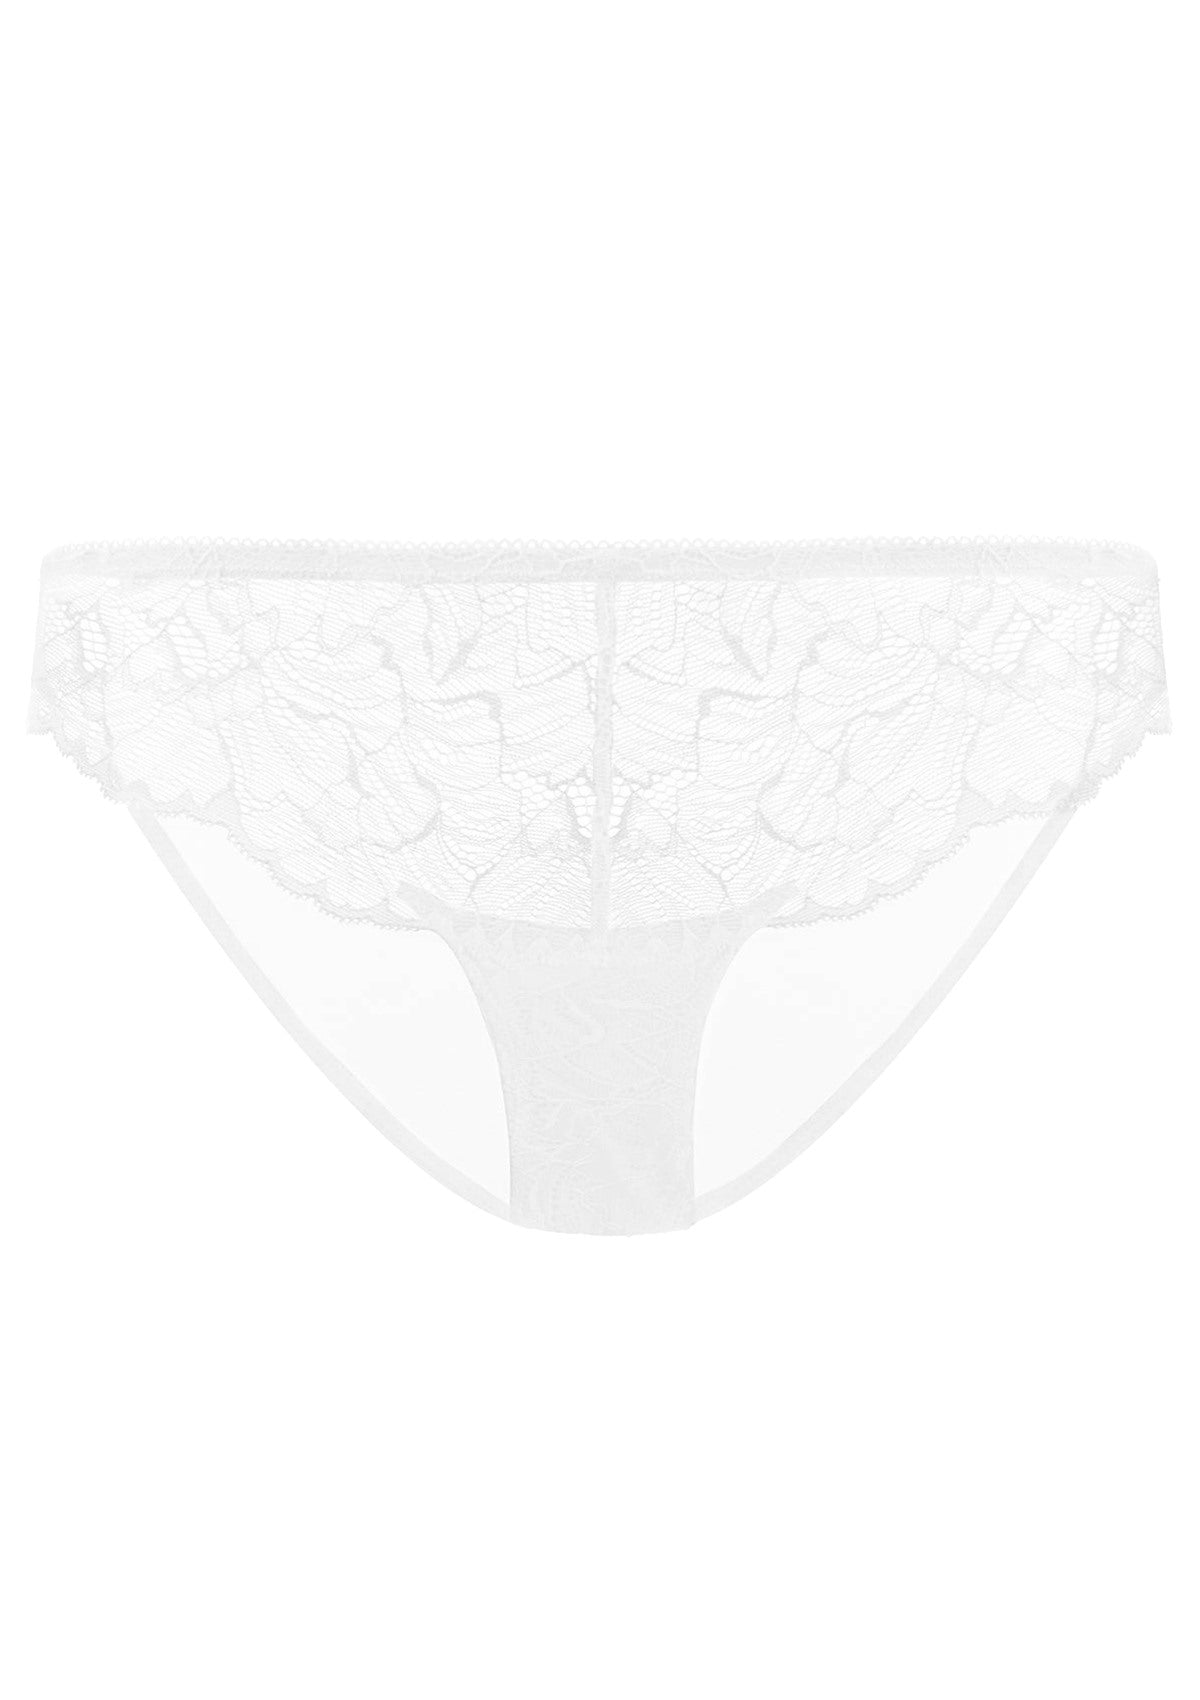 HSIA Blossom Mid-Rise Mesh Lace Panties - M / White / High-Rise Brief